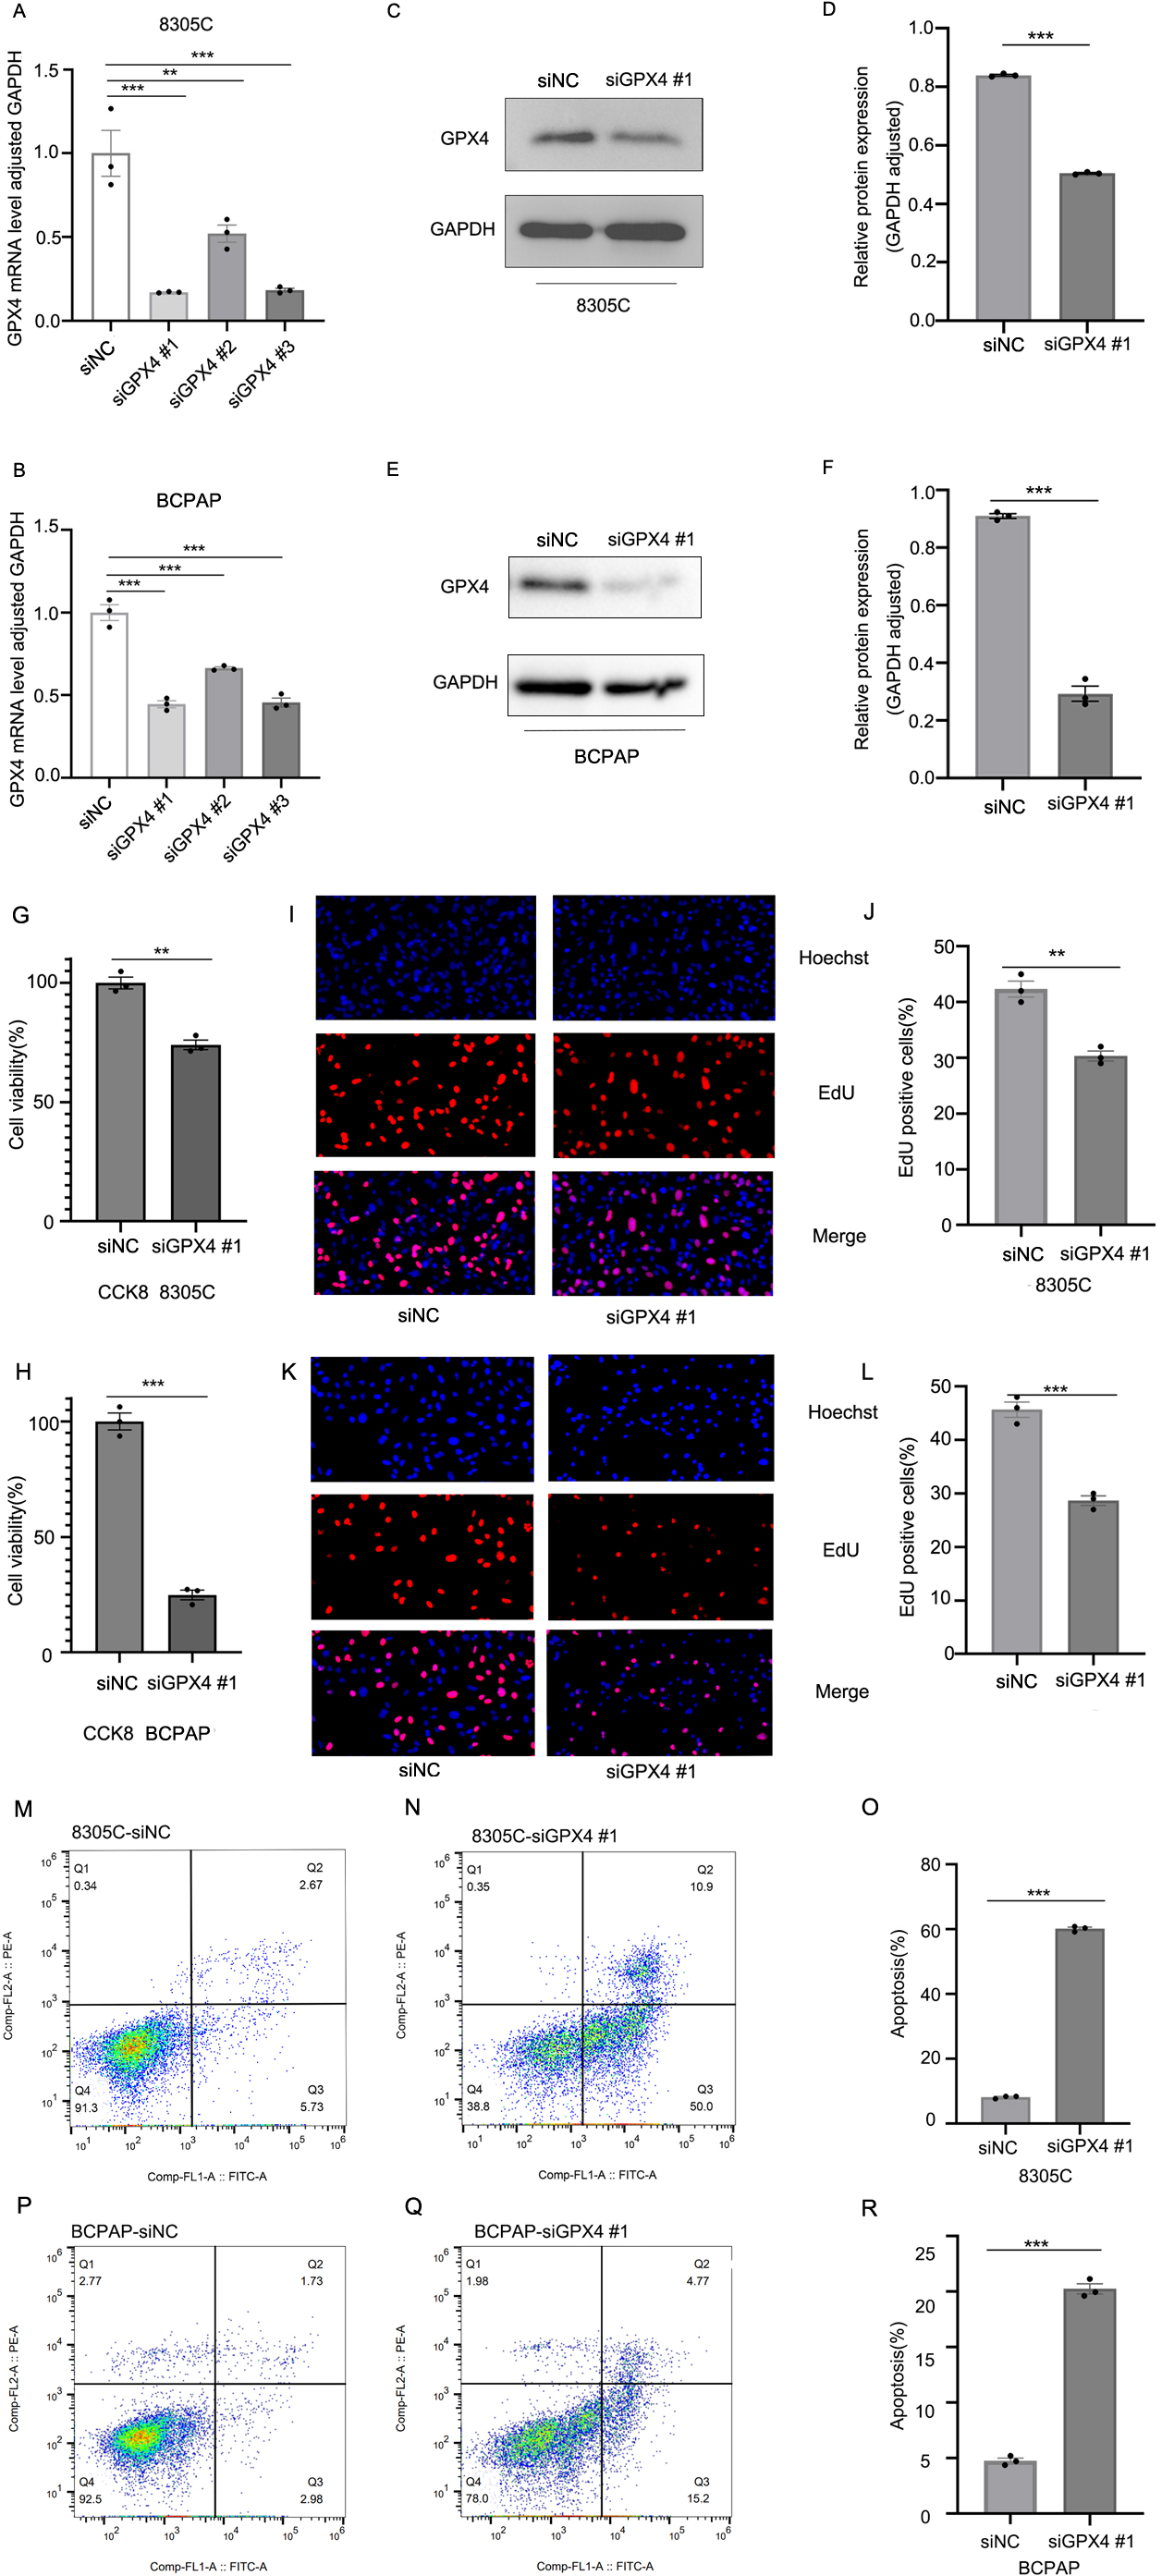 Knockdown of GPX4 expression suppresses the cell proliferation and induces apoptosis in TC cells. The expression of GPX4 mRNA and protein was detected in both 8305C and BCPAP cells transfected with GPX4 siRNAs (siGPX4) or negative control siRNA (siNC) using RT-qPCR (A, B) and western blot analysis (C-F), respectively. Data are represented as mean ± SD from three independent experiments (**P < 0.01 and ***P < 0.001). (G, H) The cell proliferation was determined in 8305C and BCPAP cells transfected with siGPX4 or siNC using CCK-8 assays. Data are represented as mean ± SD from three independent experiments (**P < 0.01 and ***P < 0.001). (H-L) The EdU assays were used to calculate the cell proliferation in 8305C and BCPAP cells transfected with siGPX4 or siNC. Data are represented as mean ± SD from three independent experiments (**P < 0.01 and ***P < 0.001). (M-R) The flow-cytometry-based apoptosis assay was performed in 8305C and BCPAP cells transfected with siGPX4 or siNC. Data are represented as mean ± SD from three independent experiments (***P < 0.001).